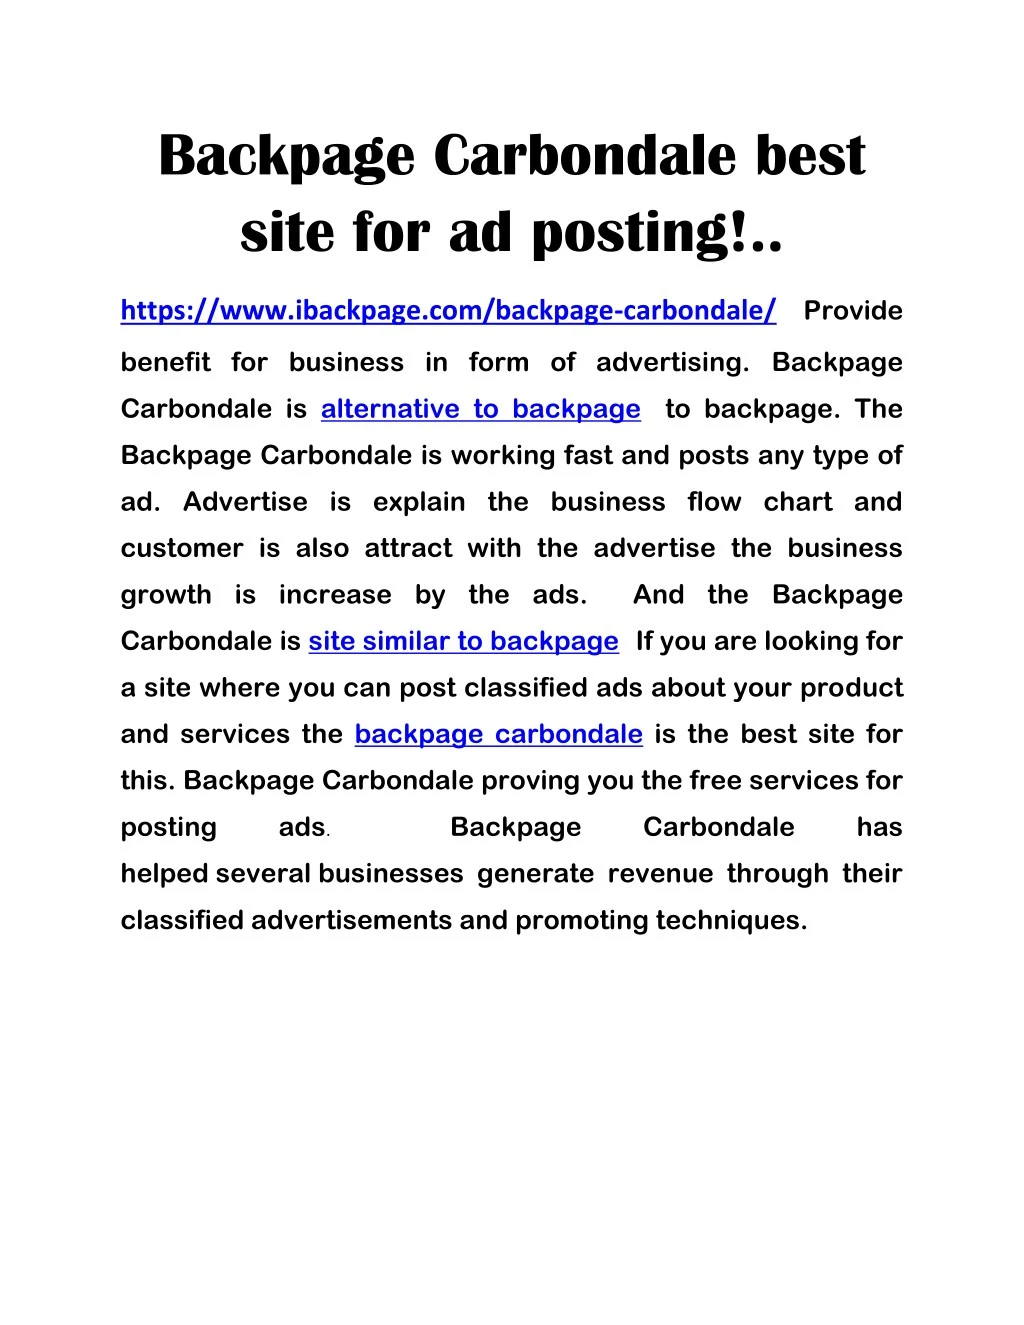 backpage carbondale best site for ad posting